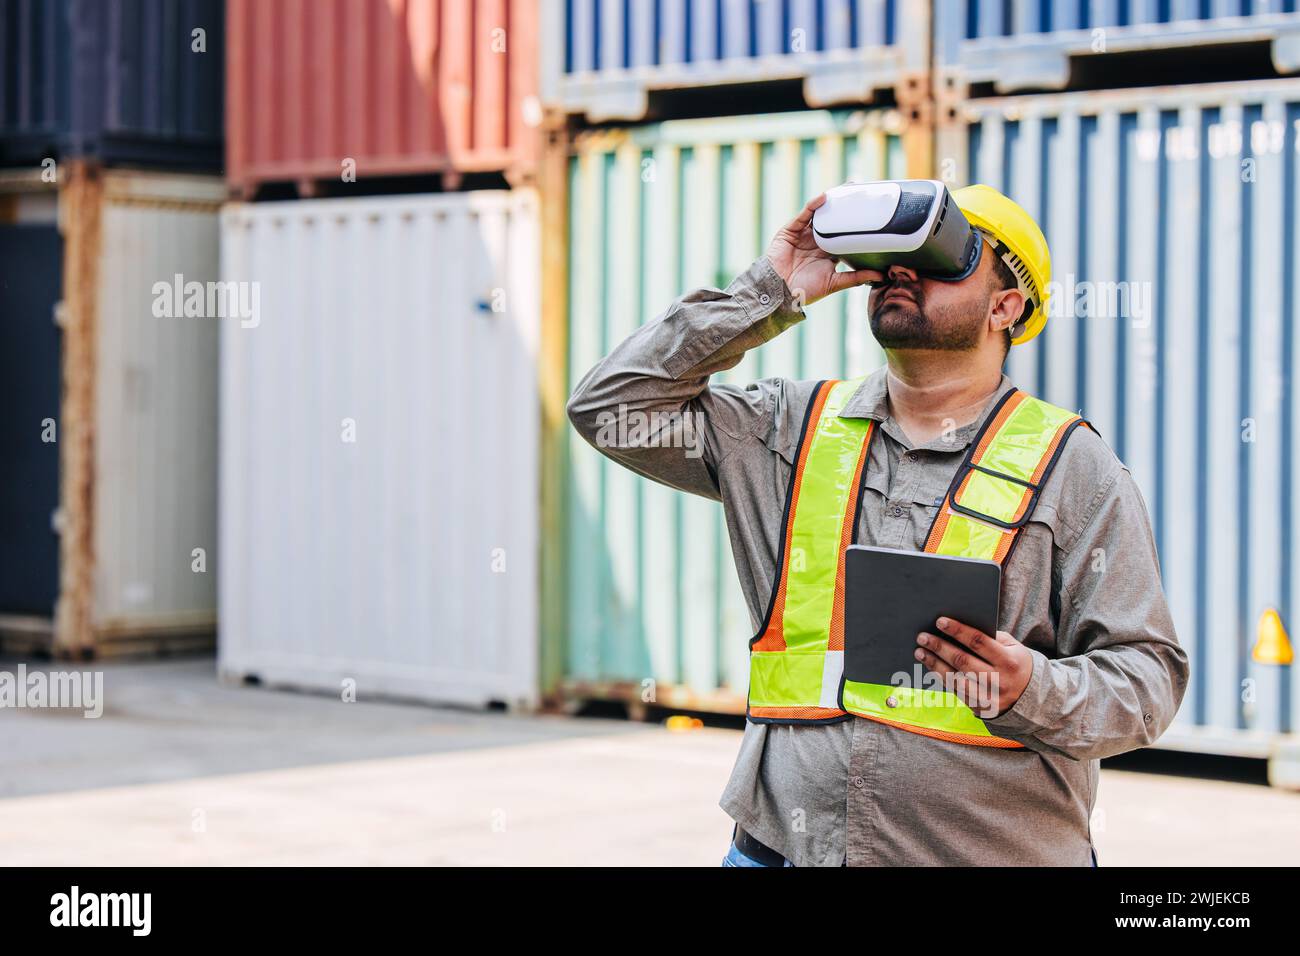 Worker Using VR Vision Pro Technology Equipment Headset Device Work at Container Yard Construction site Innovation in Logistics Industry Stock Photo